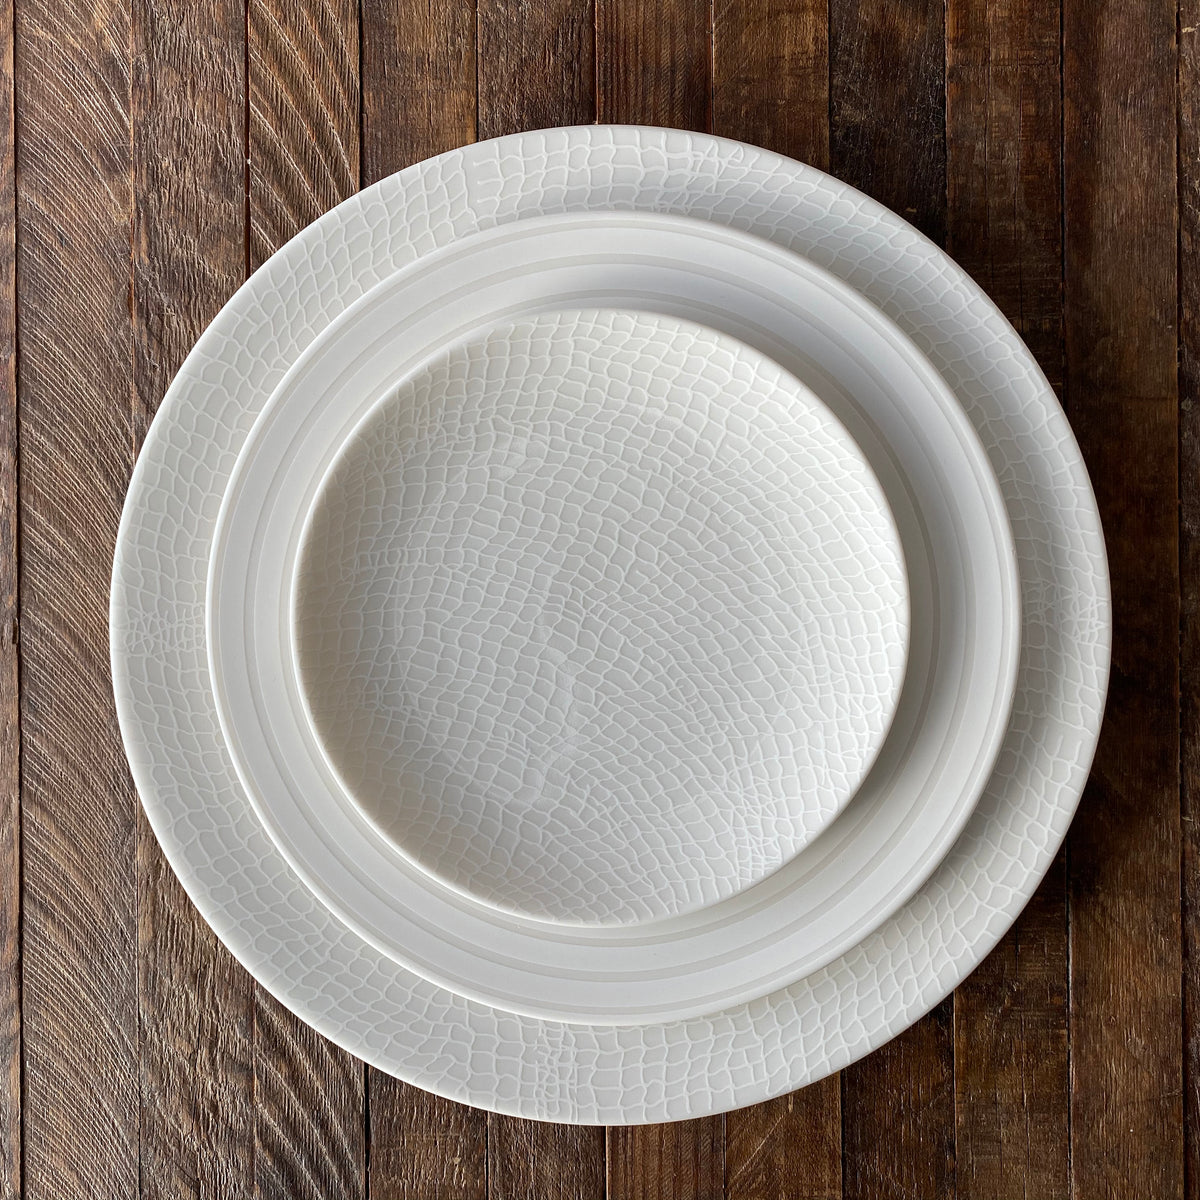 Two stacked Caskata Artisanal Home Cambridge Stripe Rimmed Salad Plates with a textured pattern are delicately placed on a wooden surface.